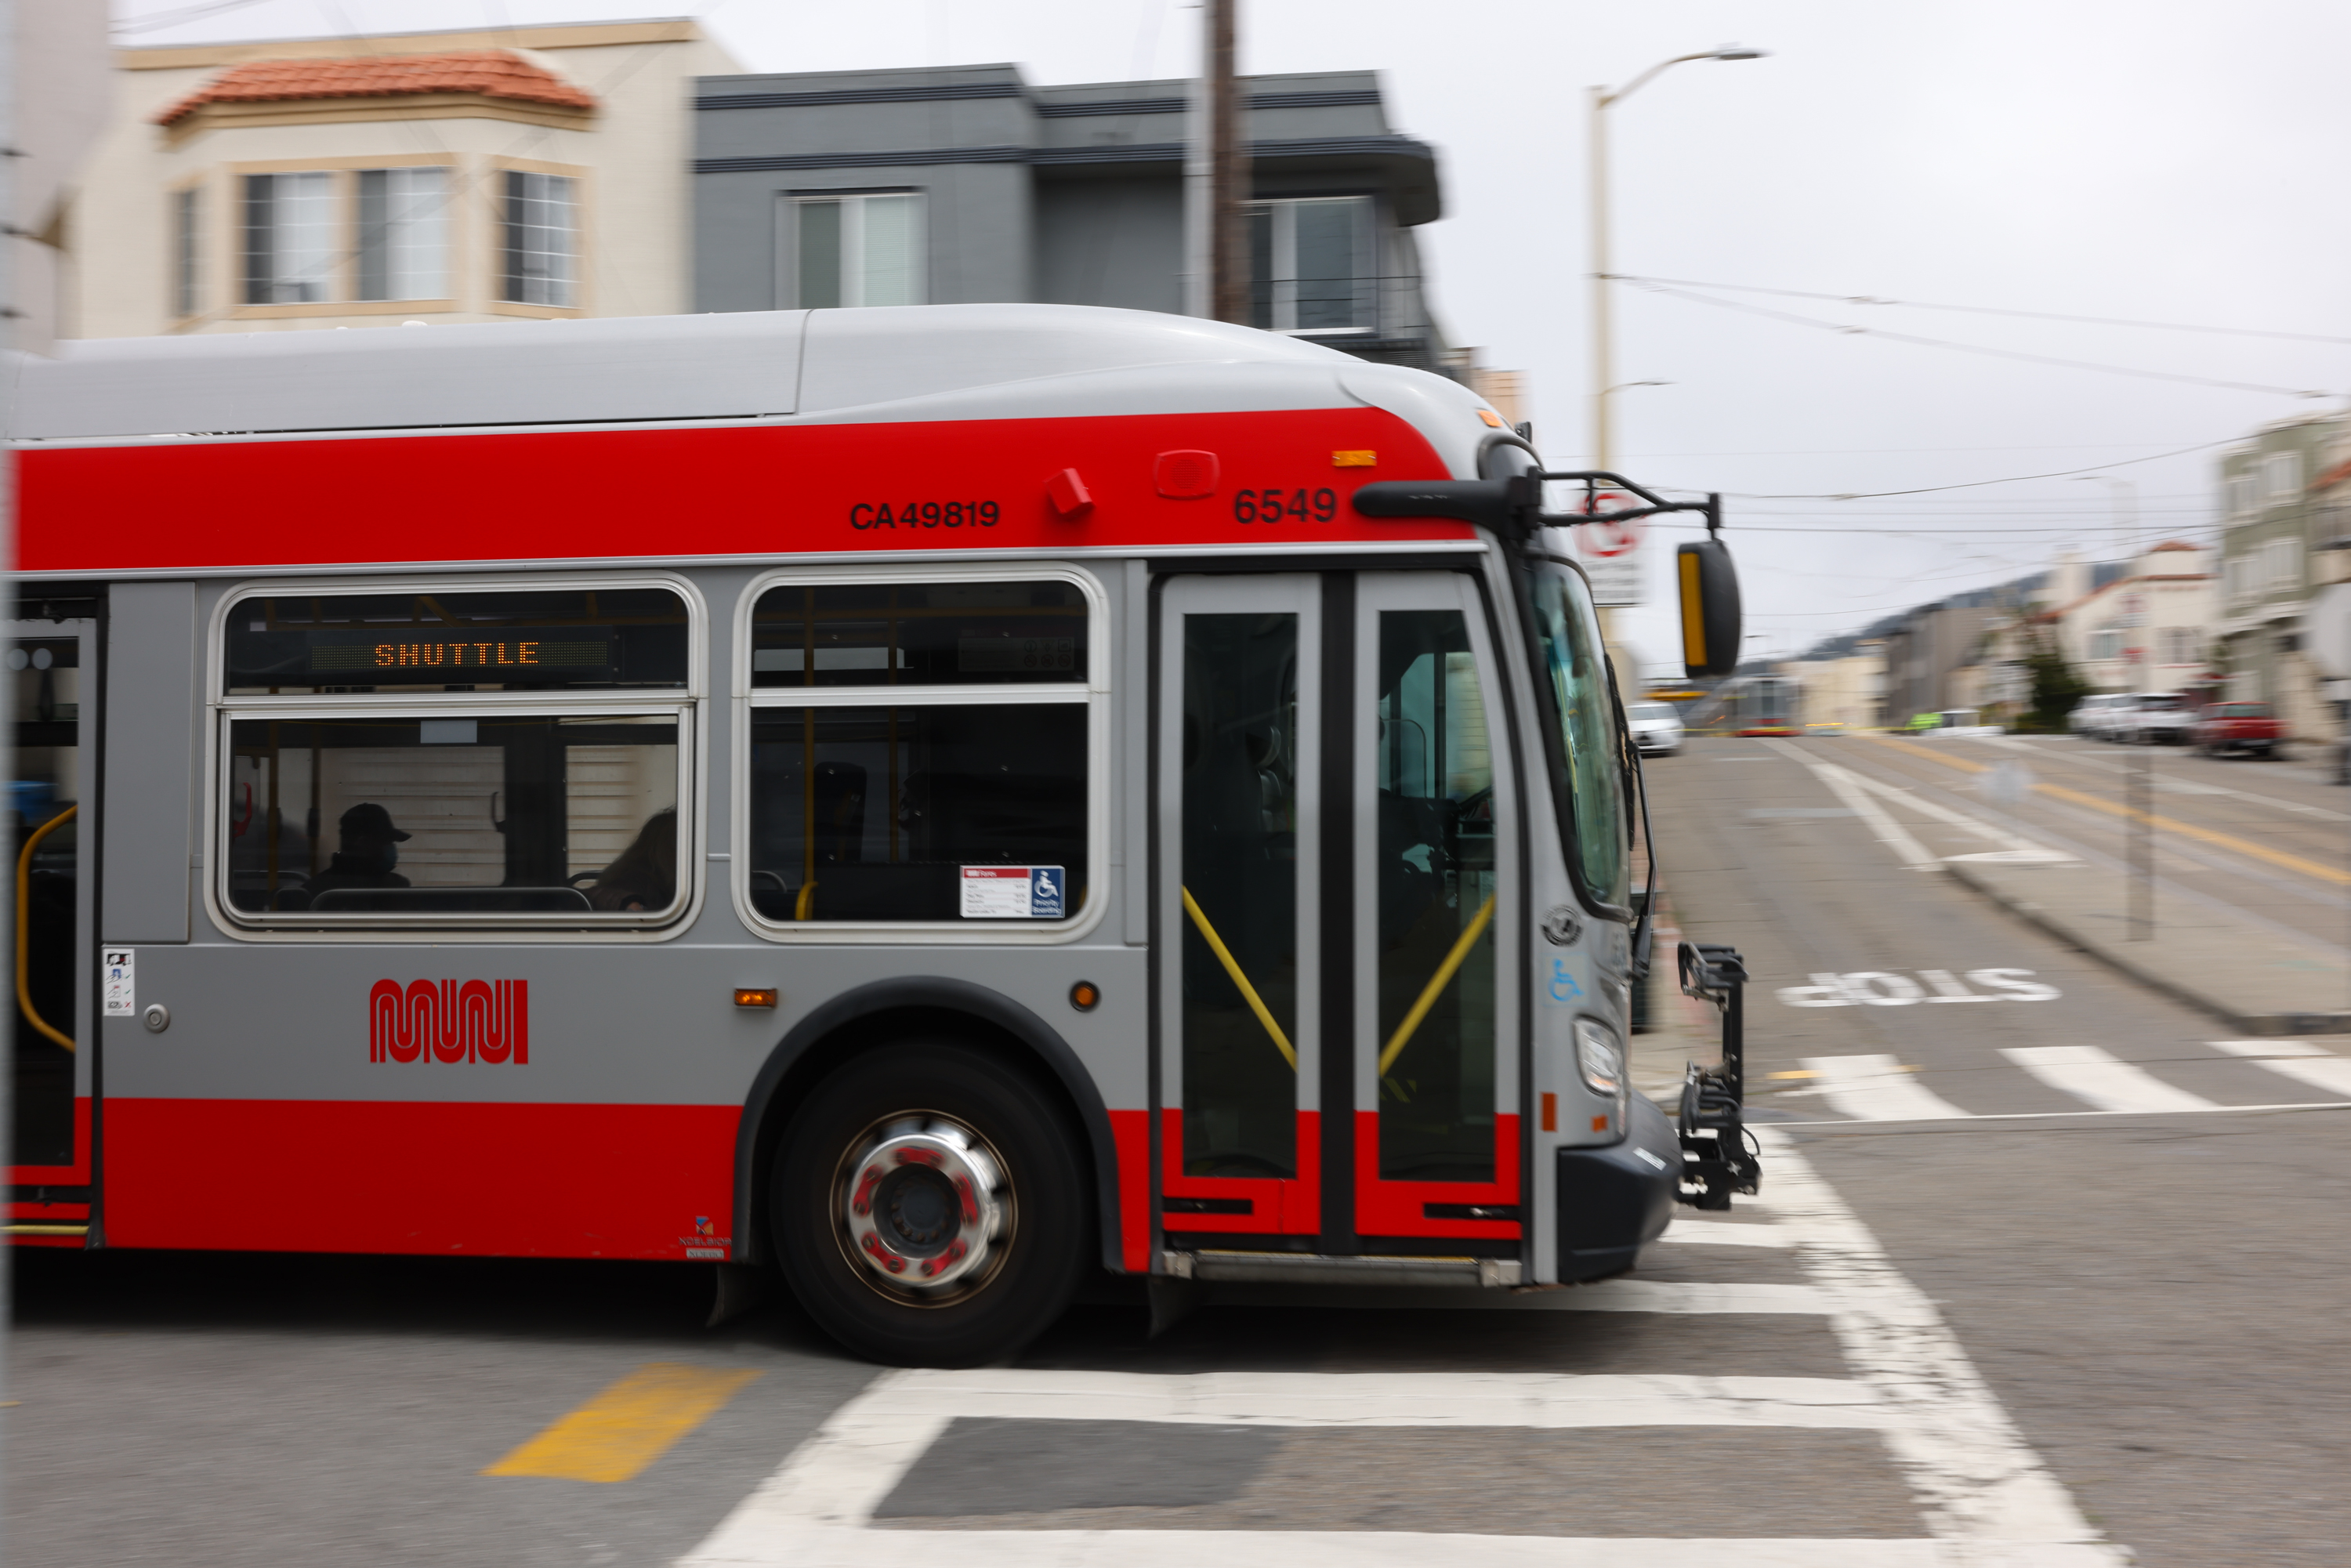 A red and gray city bus, moving on a street with buildings in the background.